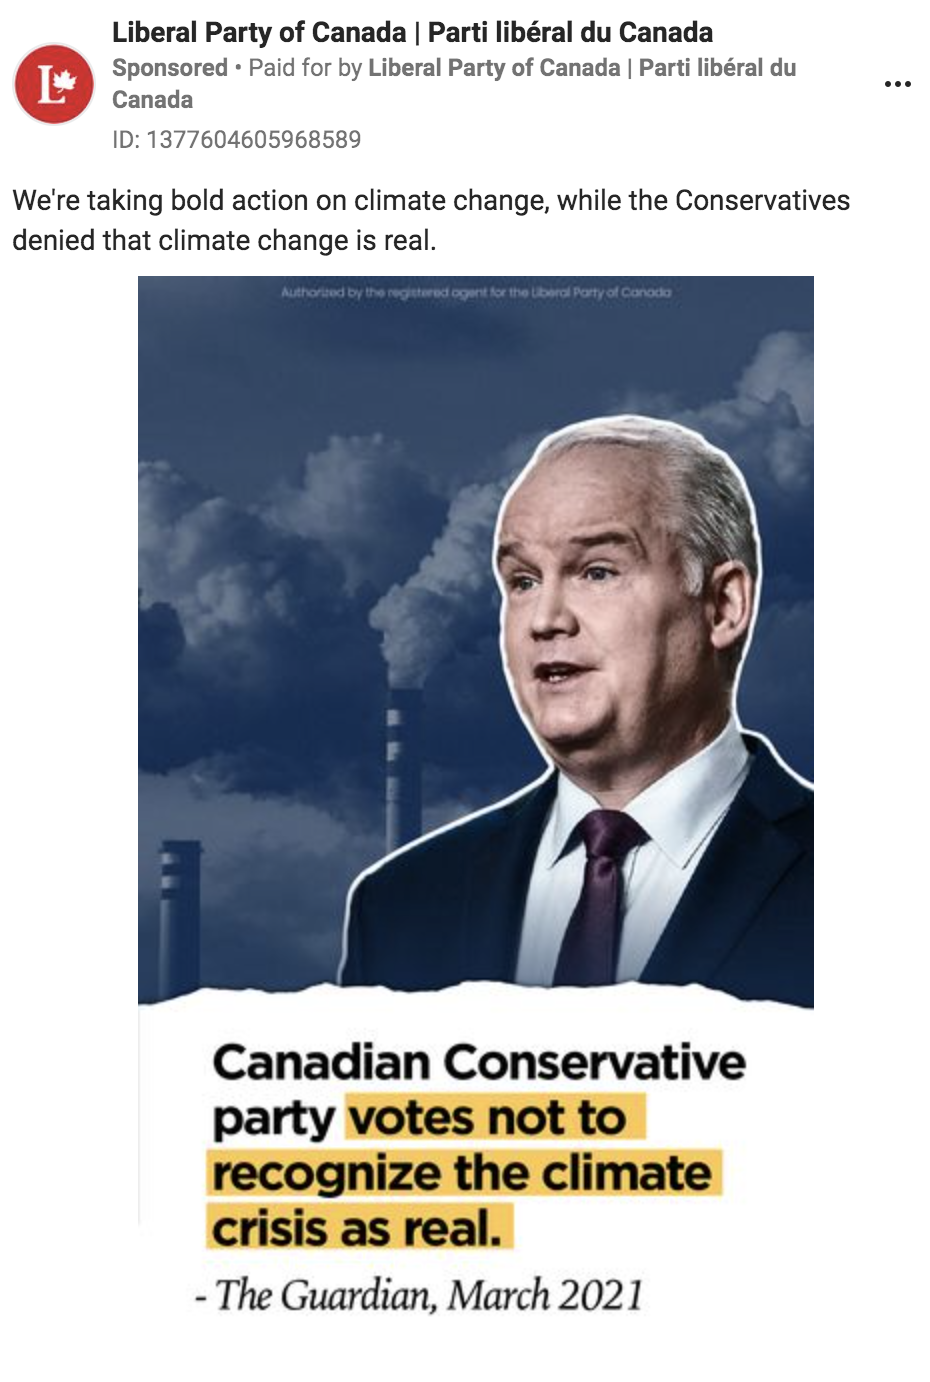 Screengrab of Liberal Party ad, targeting climate change.